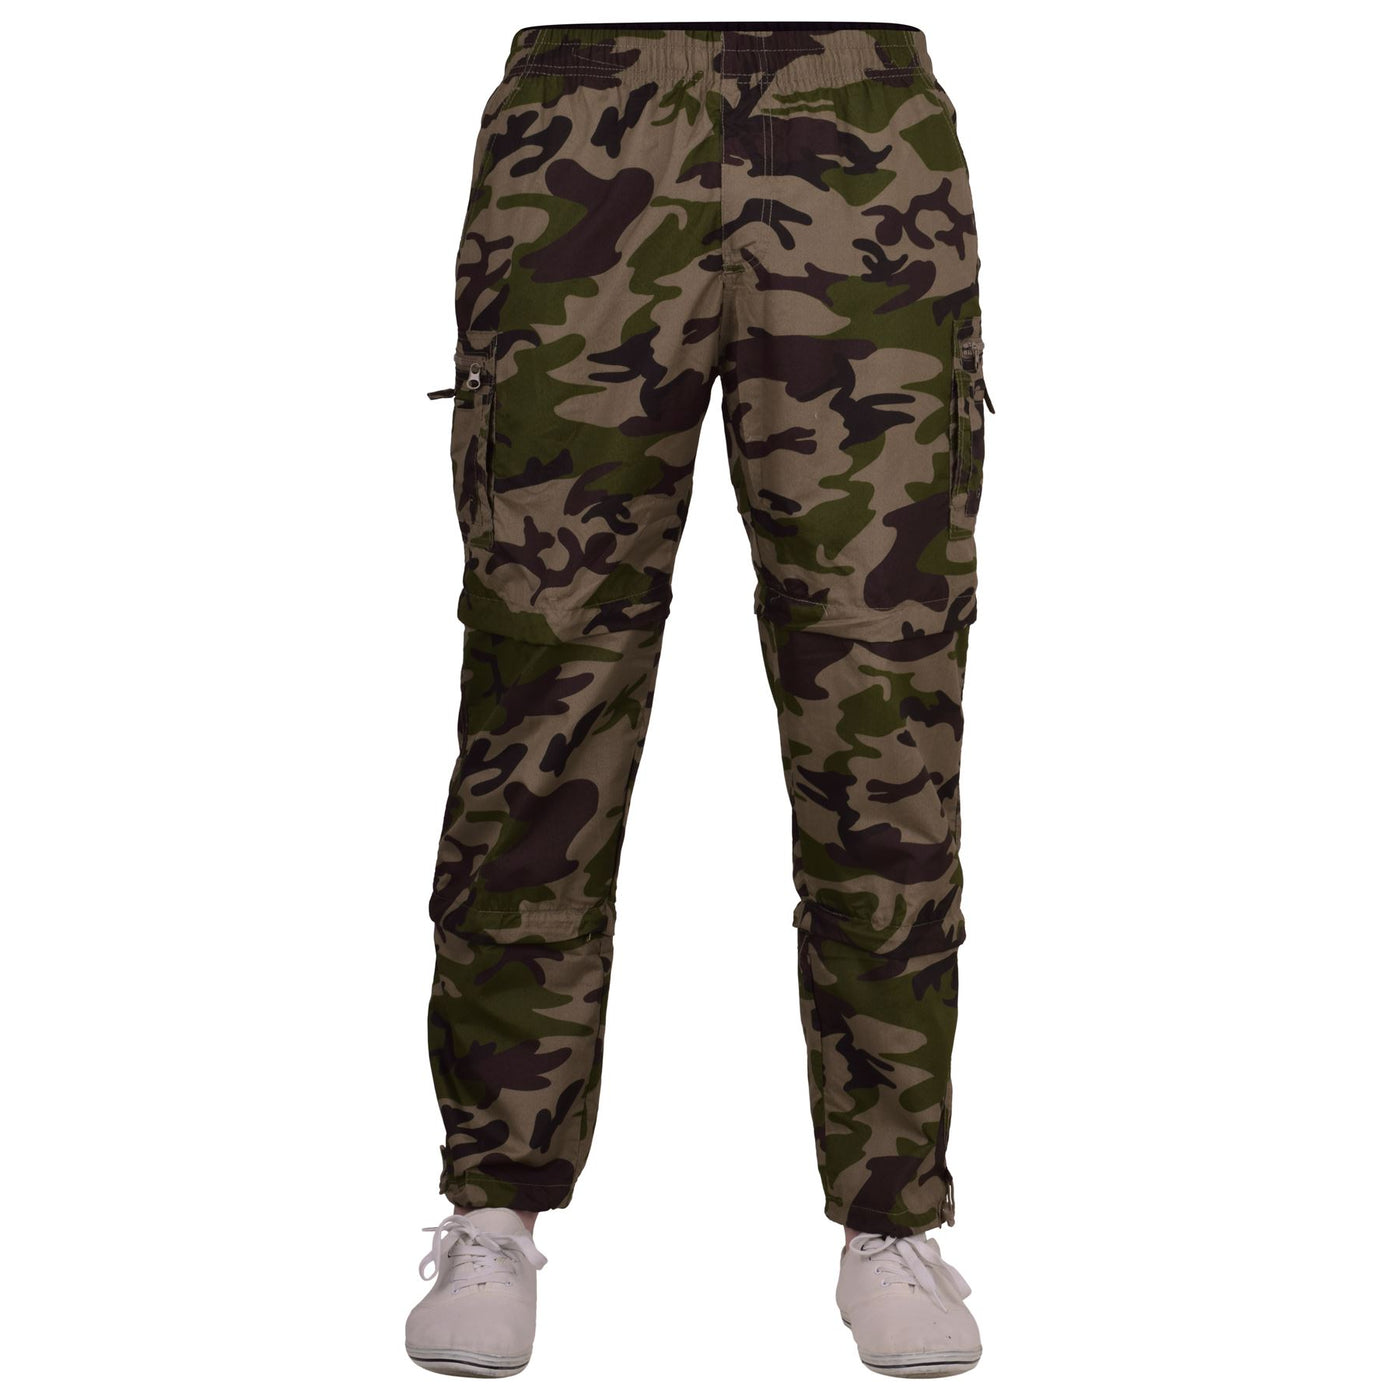 52_DNM Mens Combat Camouflage Cargo Loose Fitting Elastic Waist 3/4 Pants | Military Tactical Trousers Zip Off Shorts Zip-Off 3/4's with Zipped Pockets and Adjustable Hem